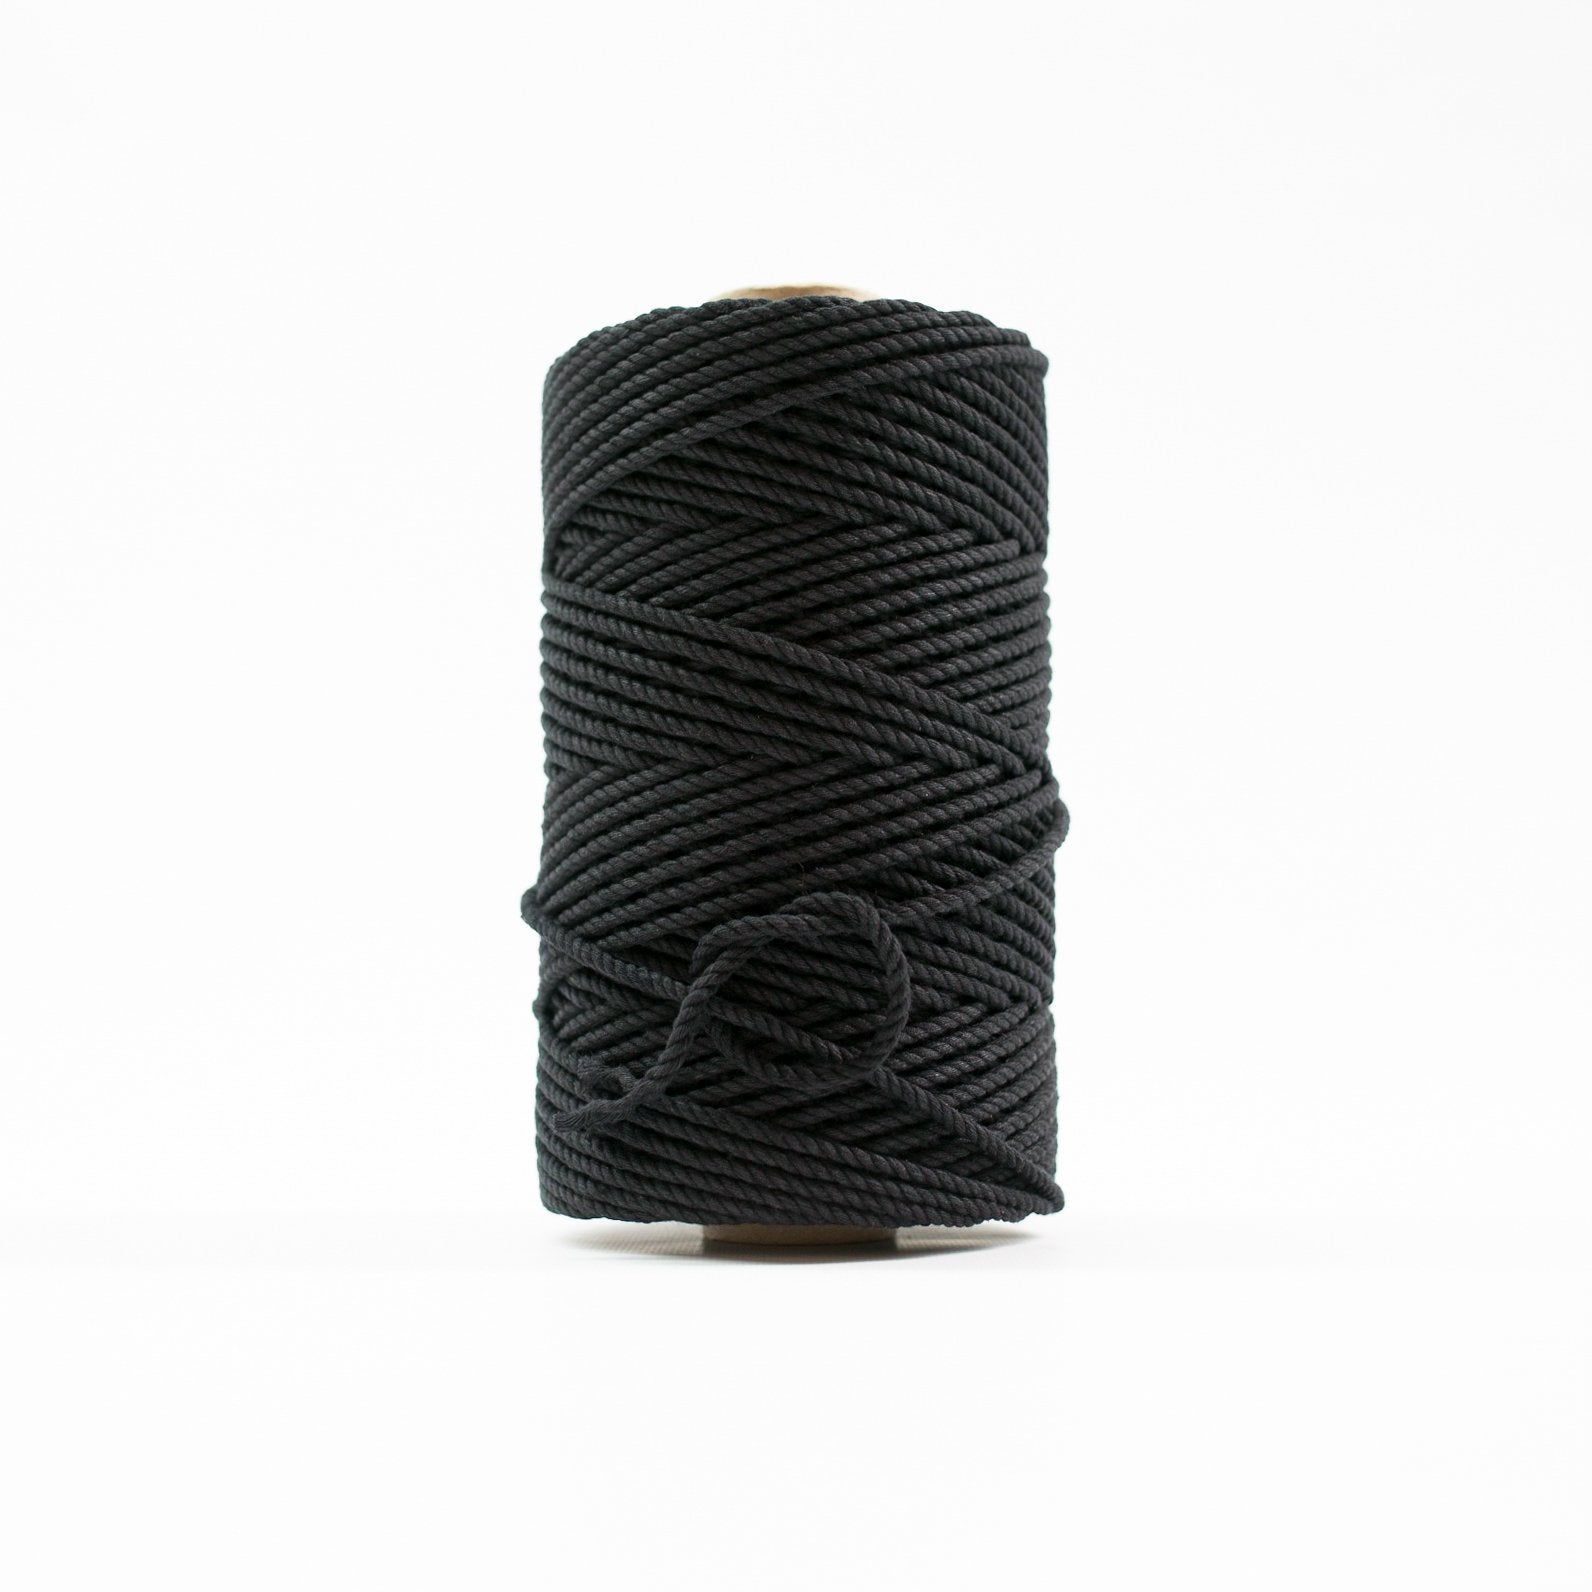 Mary Maker Studio Luxe Colour Cotton 4mm 1KG Recycled Luxe Macrame Rope // Black macrame cotton macrame rope macrame workshop macrame patterns macrame